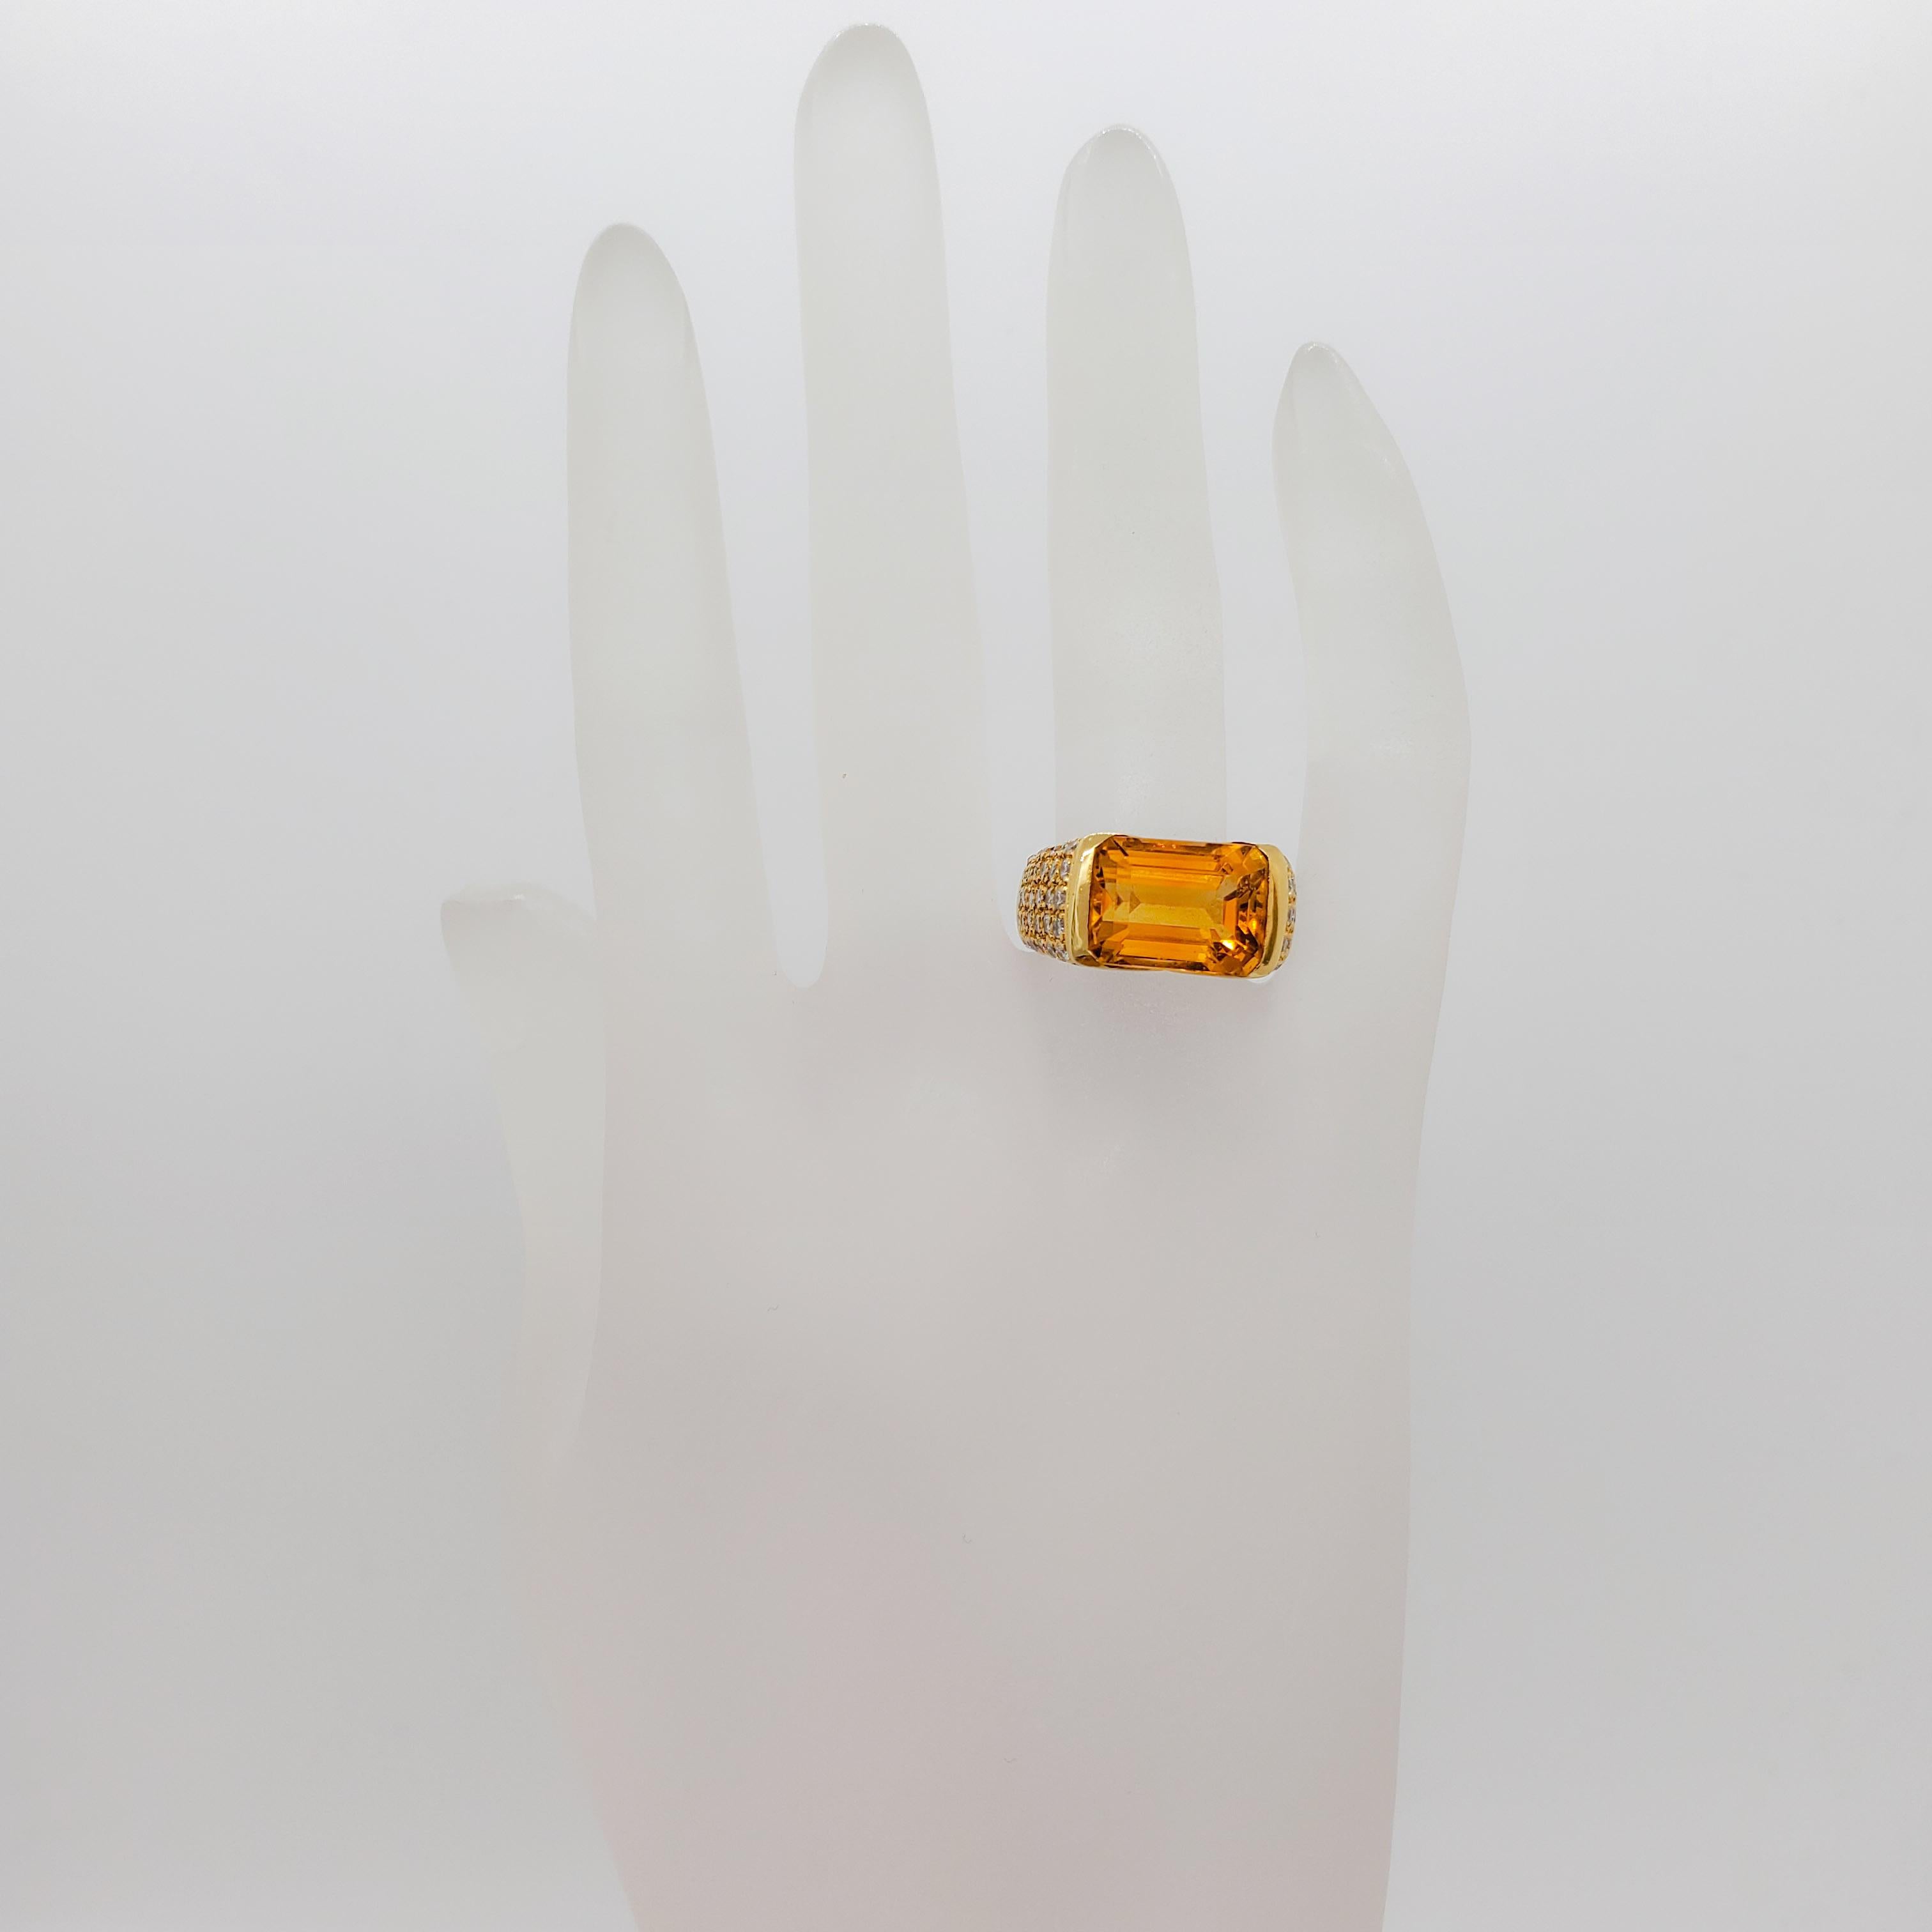 Women's or Men's Citrine Emerald Cut and Diamond Cocktail Ring in 18k Yellow Gold